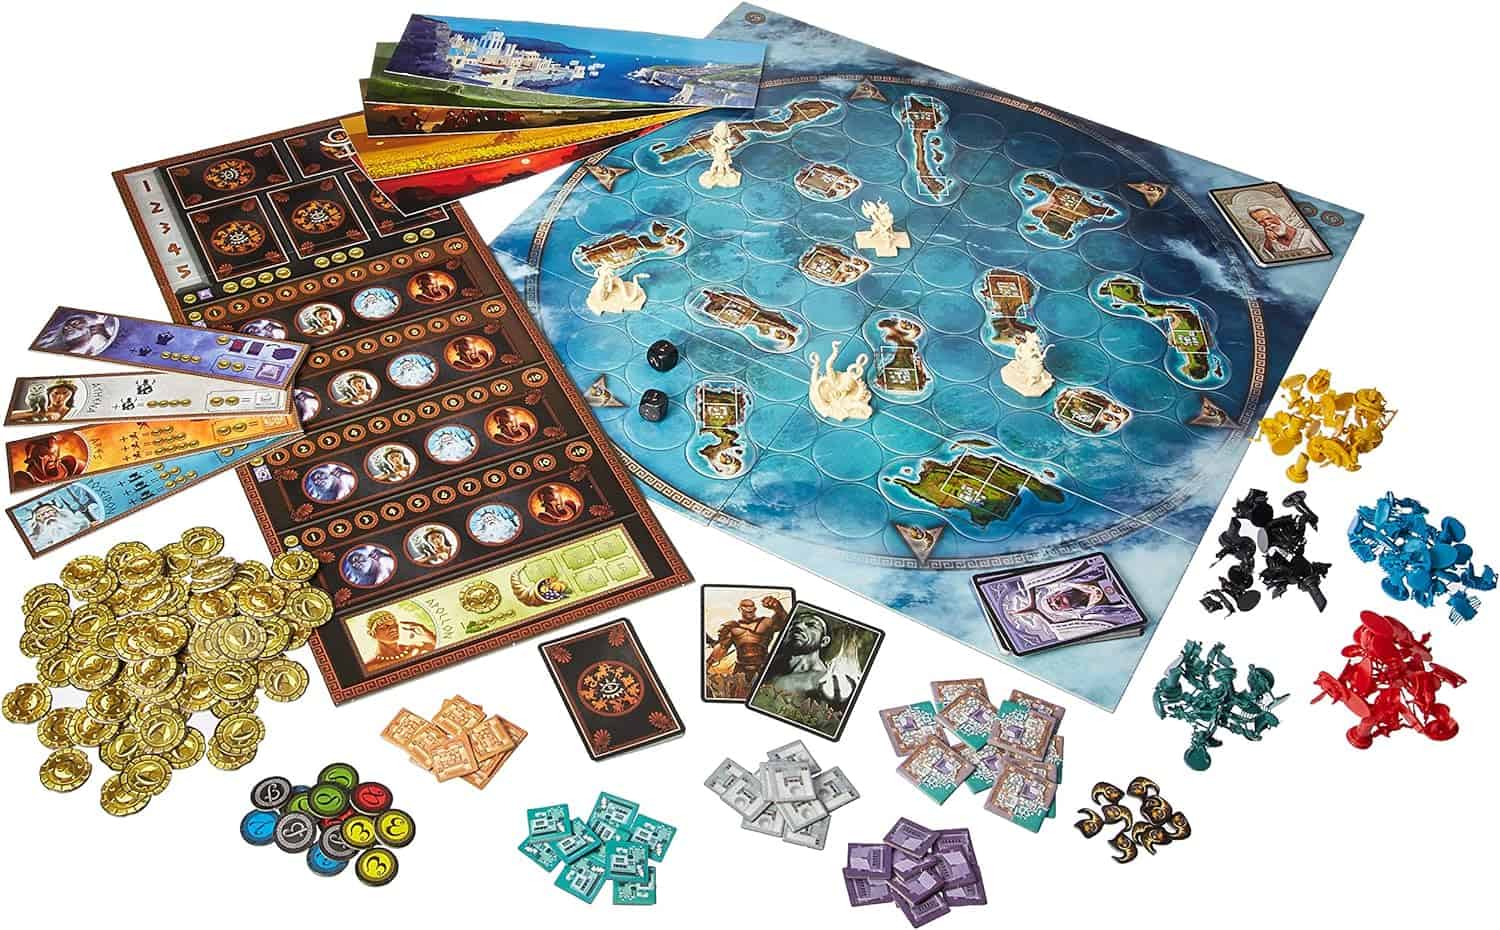 How to play Cyclades: rules, setup and strategies explained